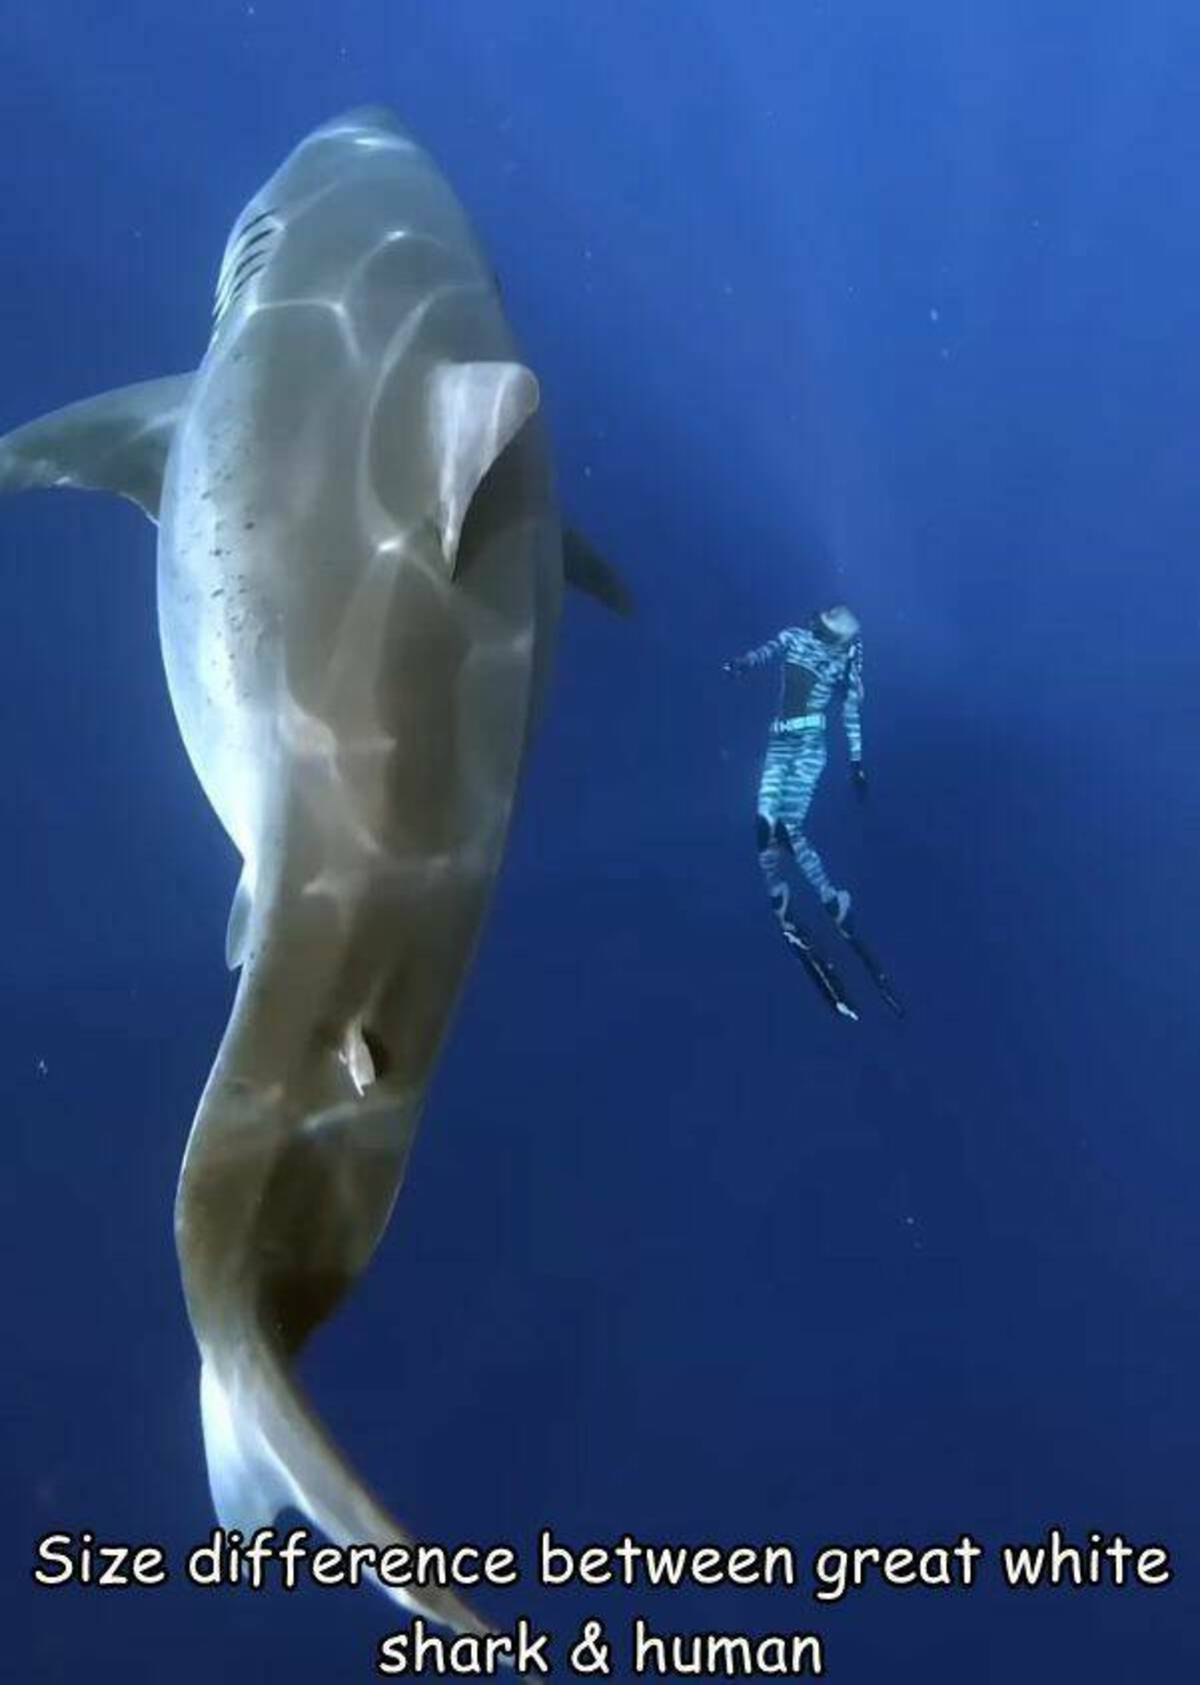 whales dolphins and porpoises - Size difference between great white shark & human